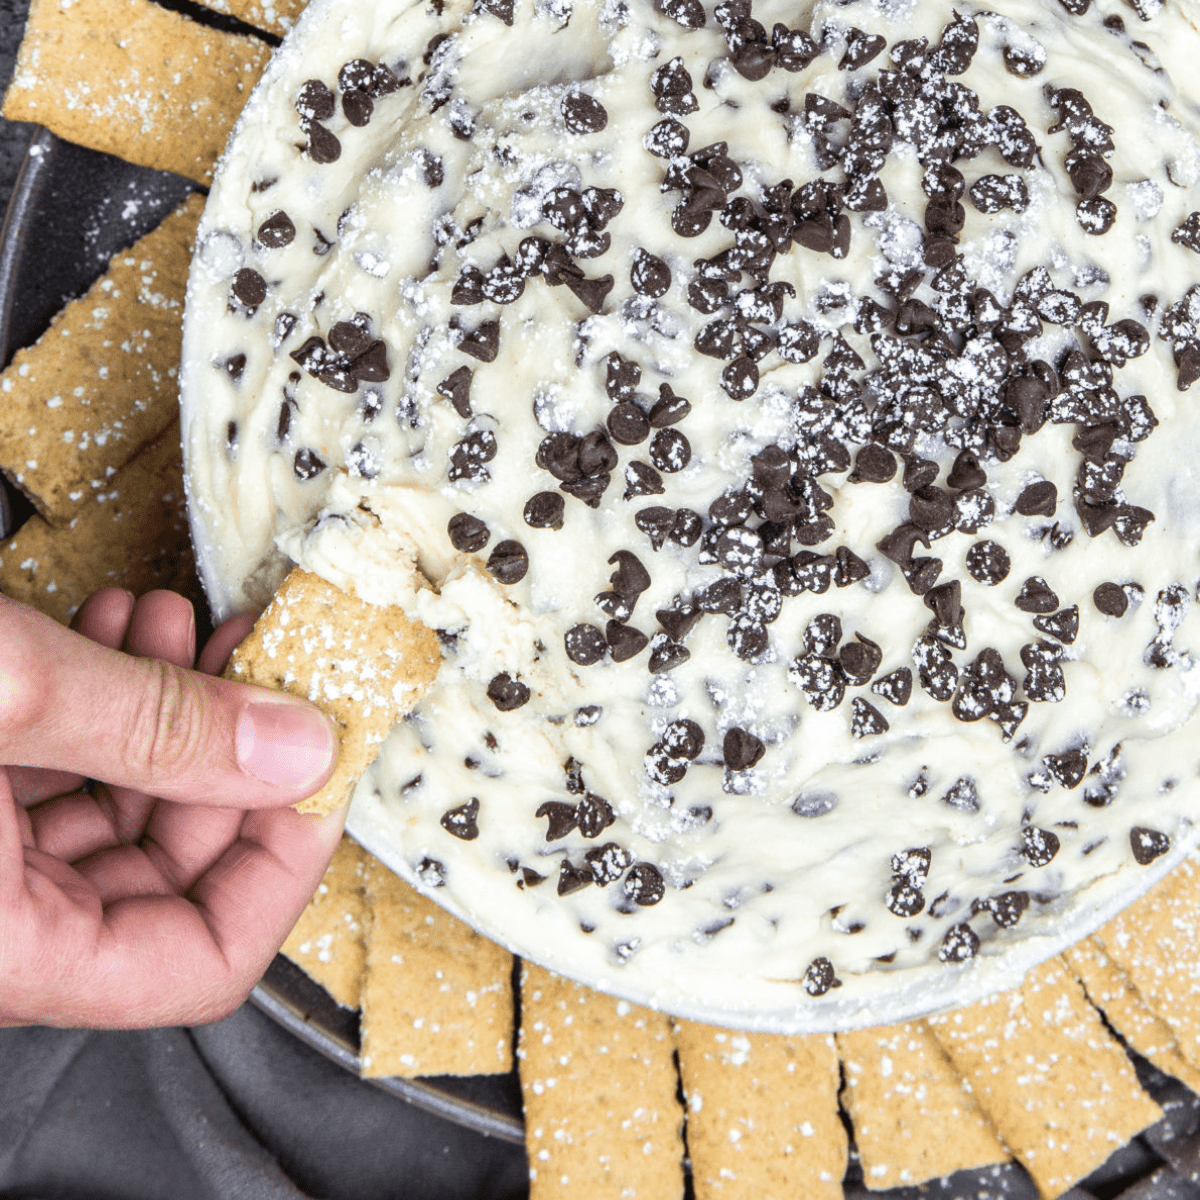 A bowl full of cannoli dip on a gray surface.